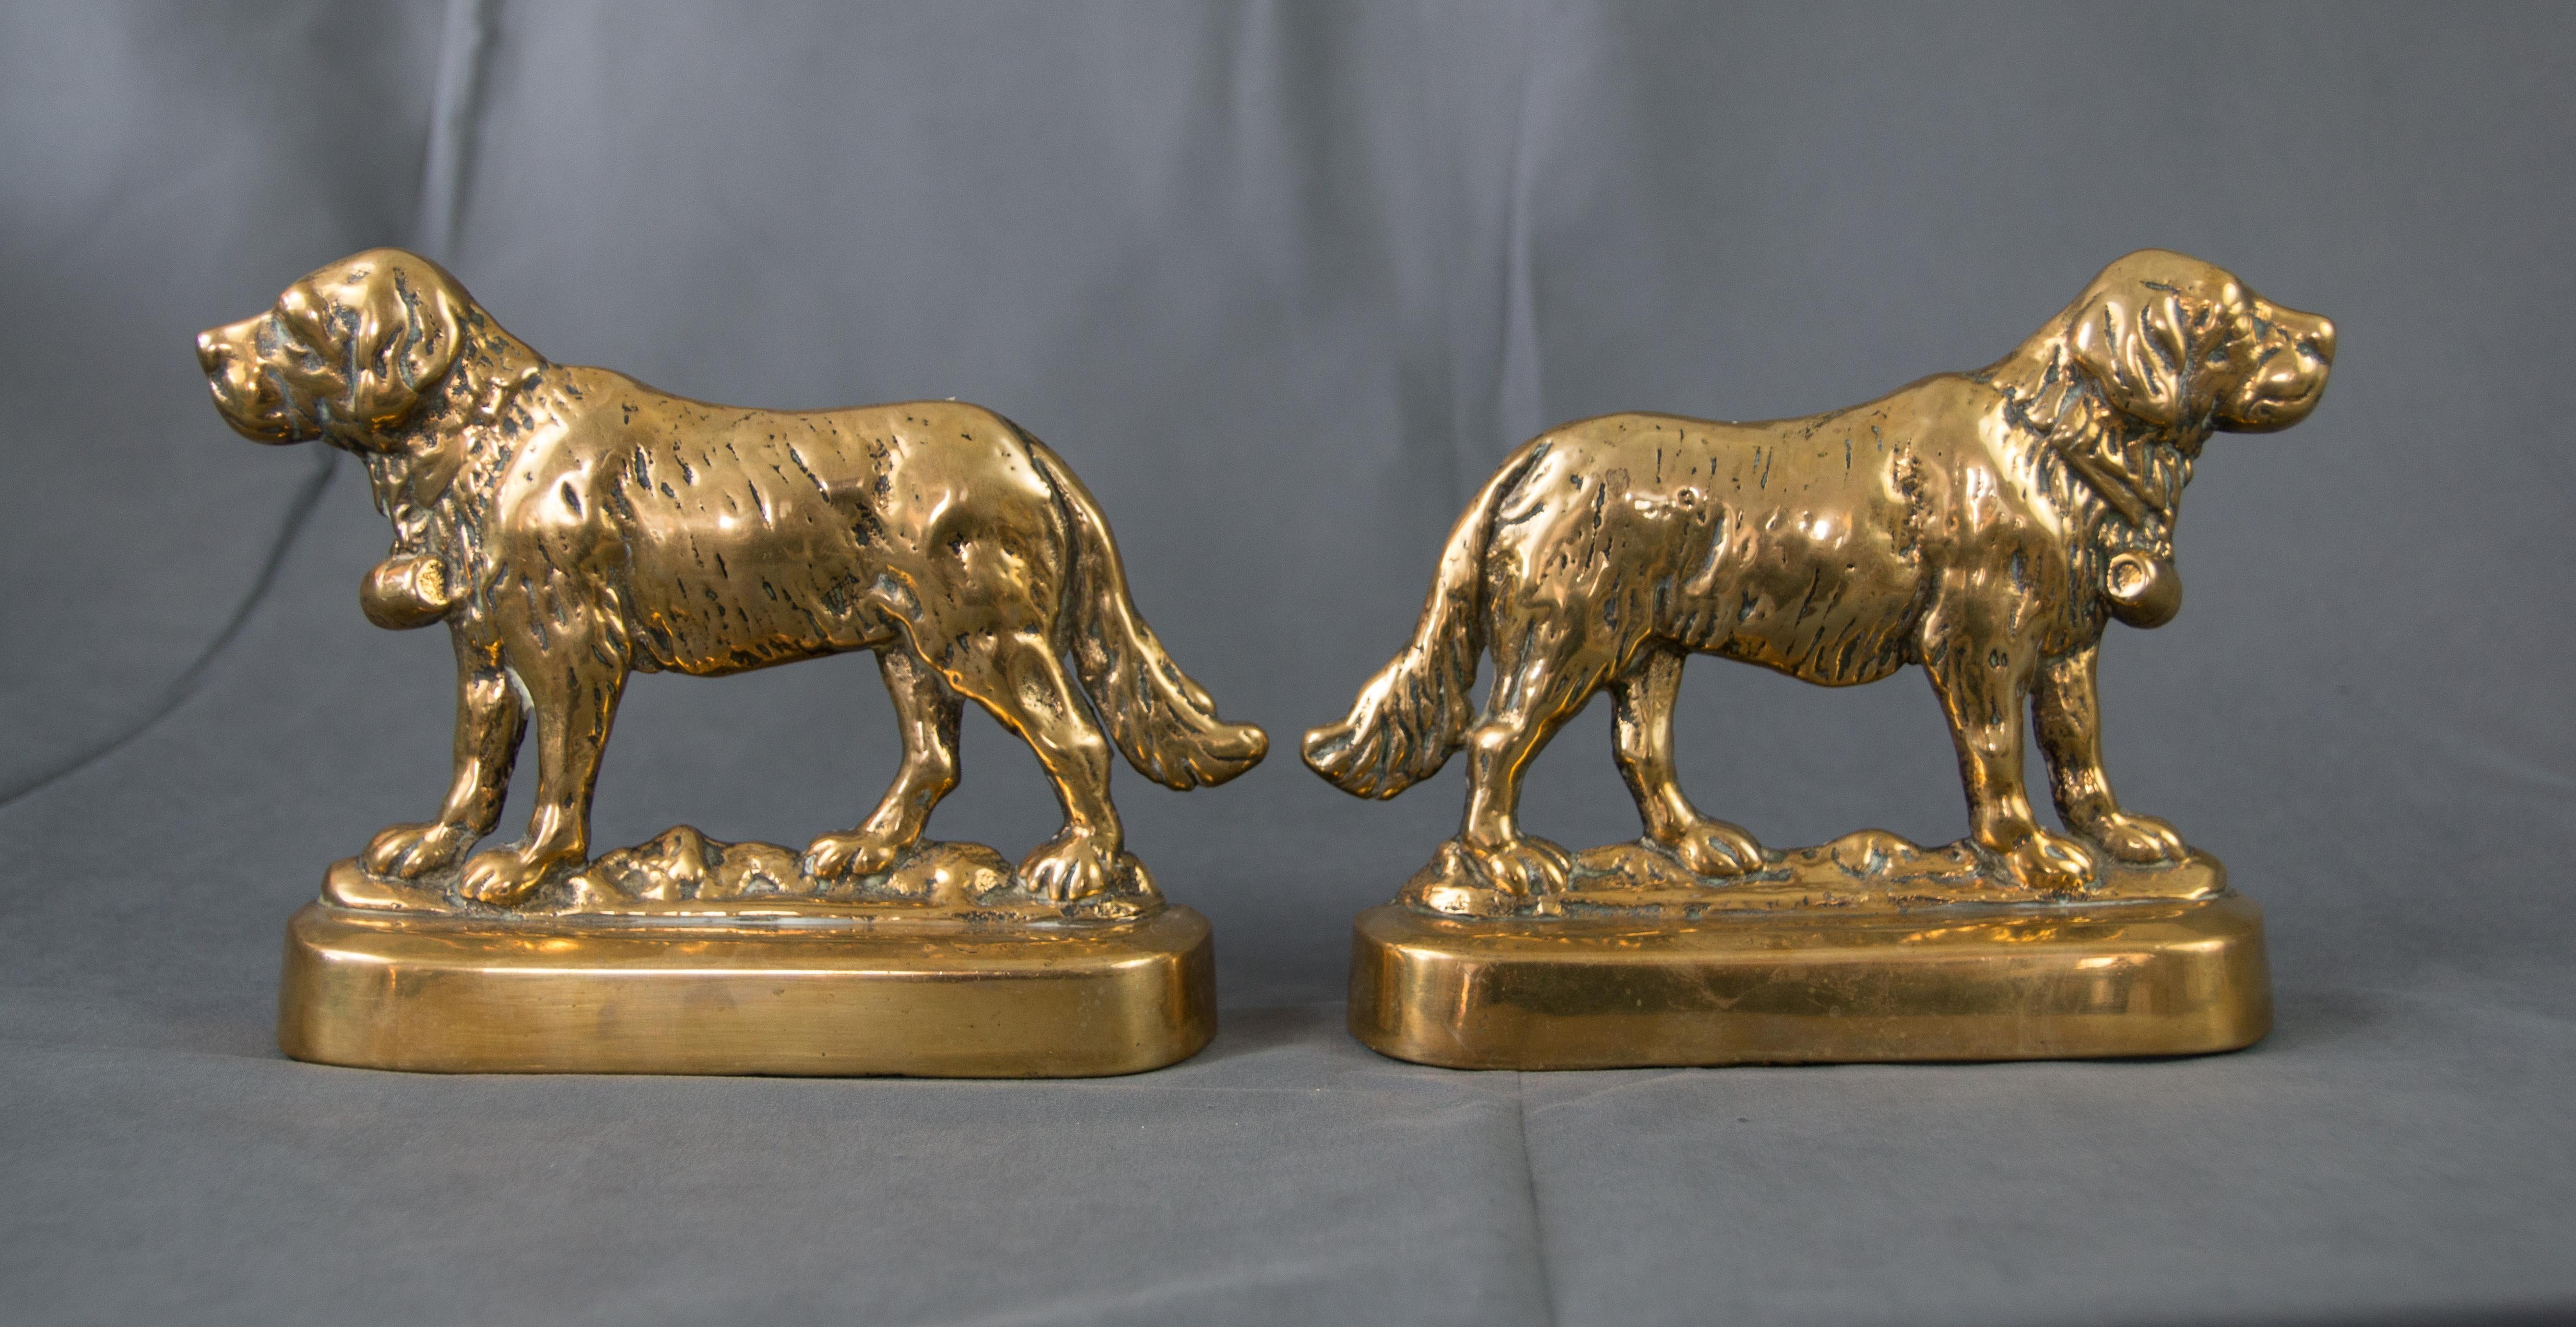 A superb pair of large antique English solid brass St. Bernard dog bookends or mantel decorations, circa 1920. These handsome dogs are finely cast heavy solid brass and would look fabulous displayed on a bookcase or mantel.

Dimensions
9.5